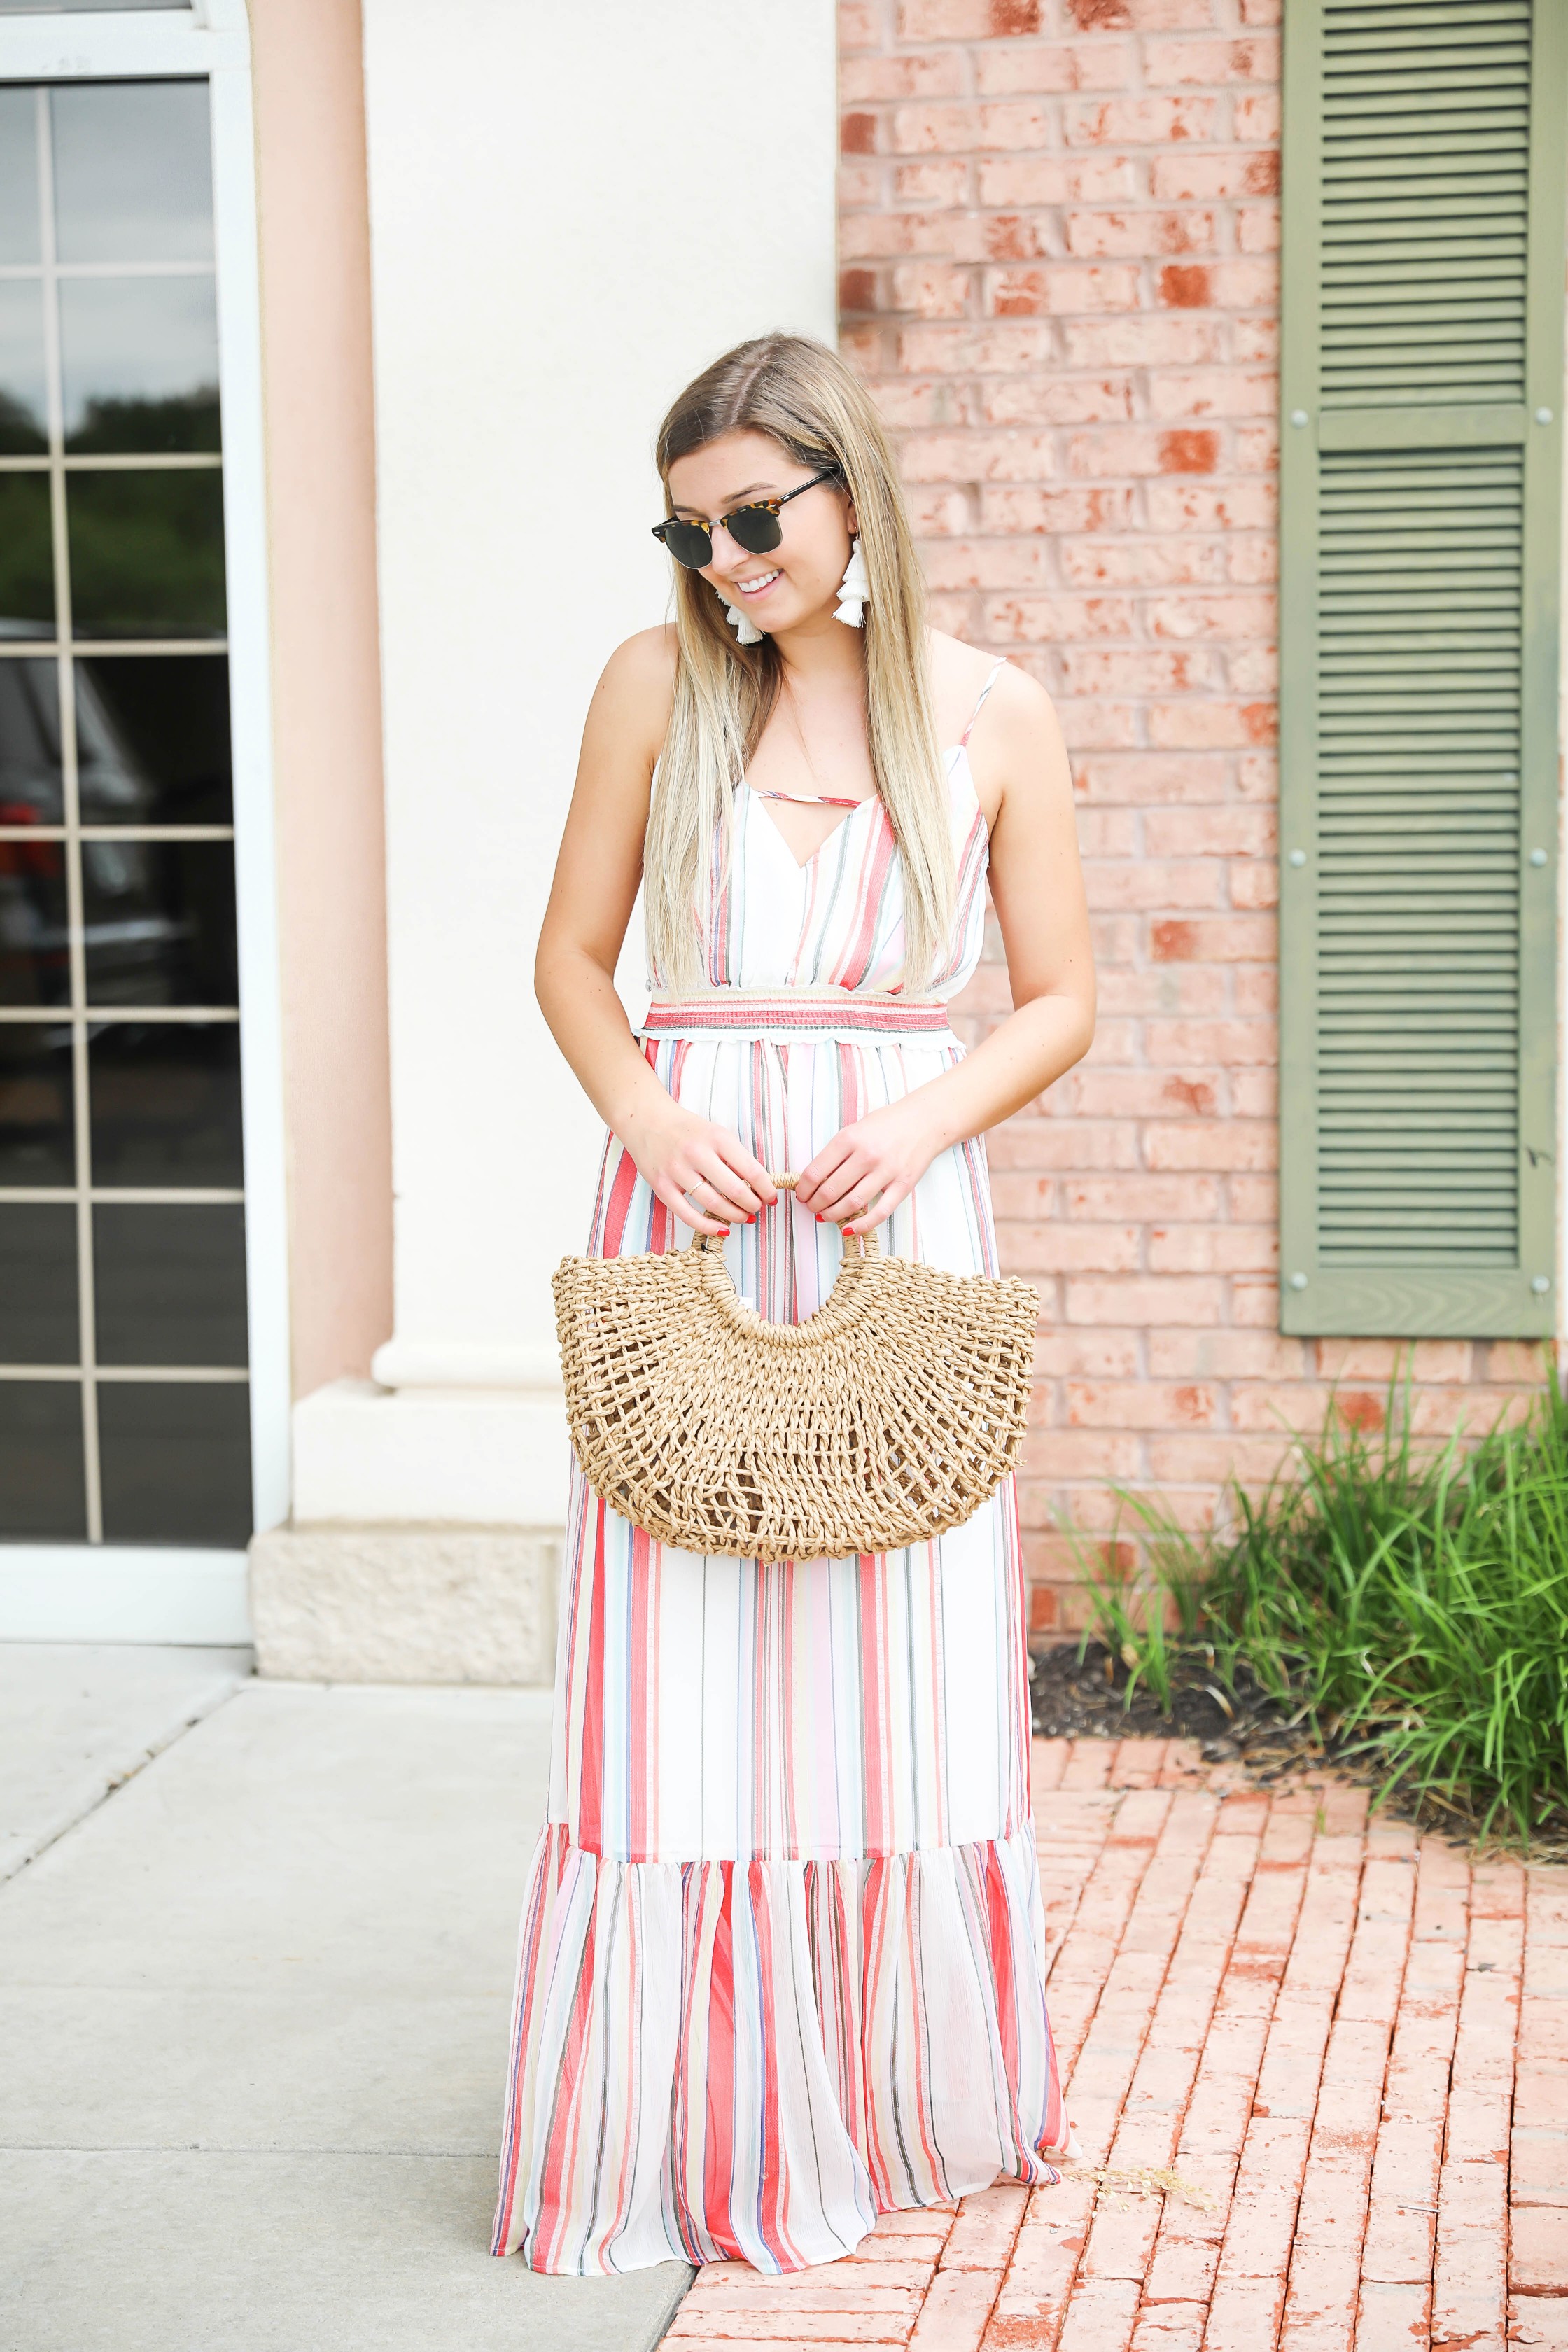 Striped summer maxi dress from revolve! Cute summer fashion and easy outfit ideas! Paired with my favorite straw bag on my blog daily dose of charm by lauren lindmark 